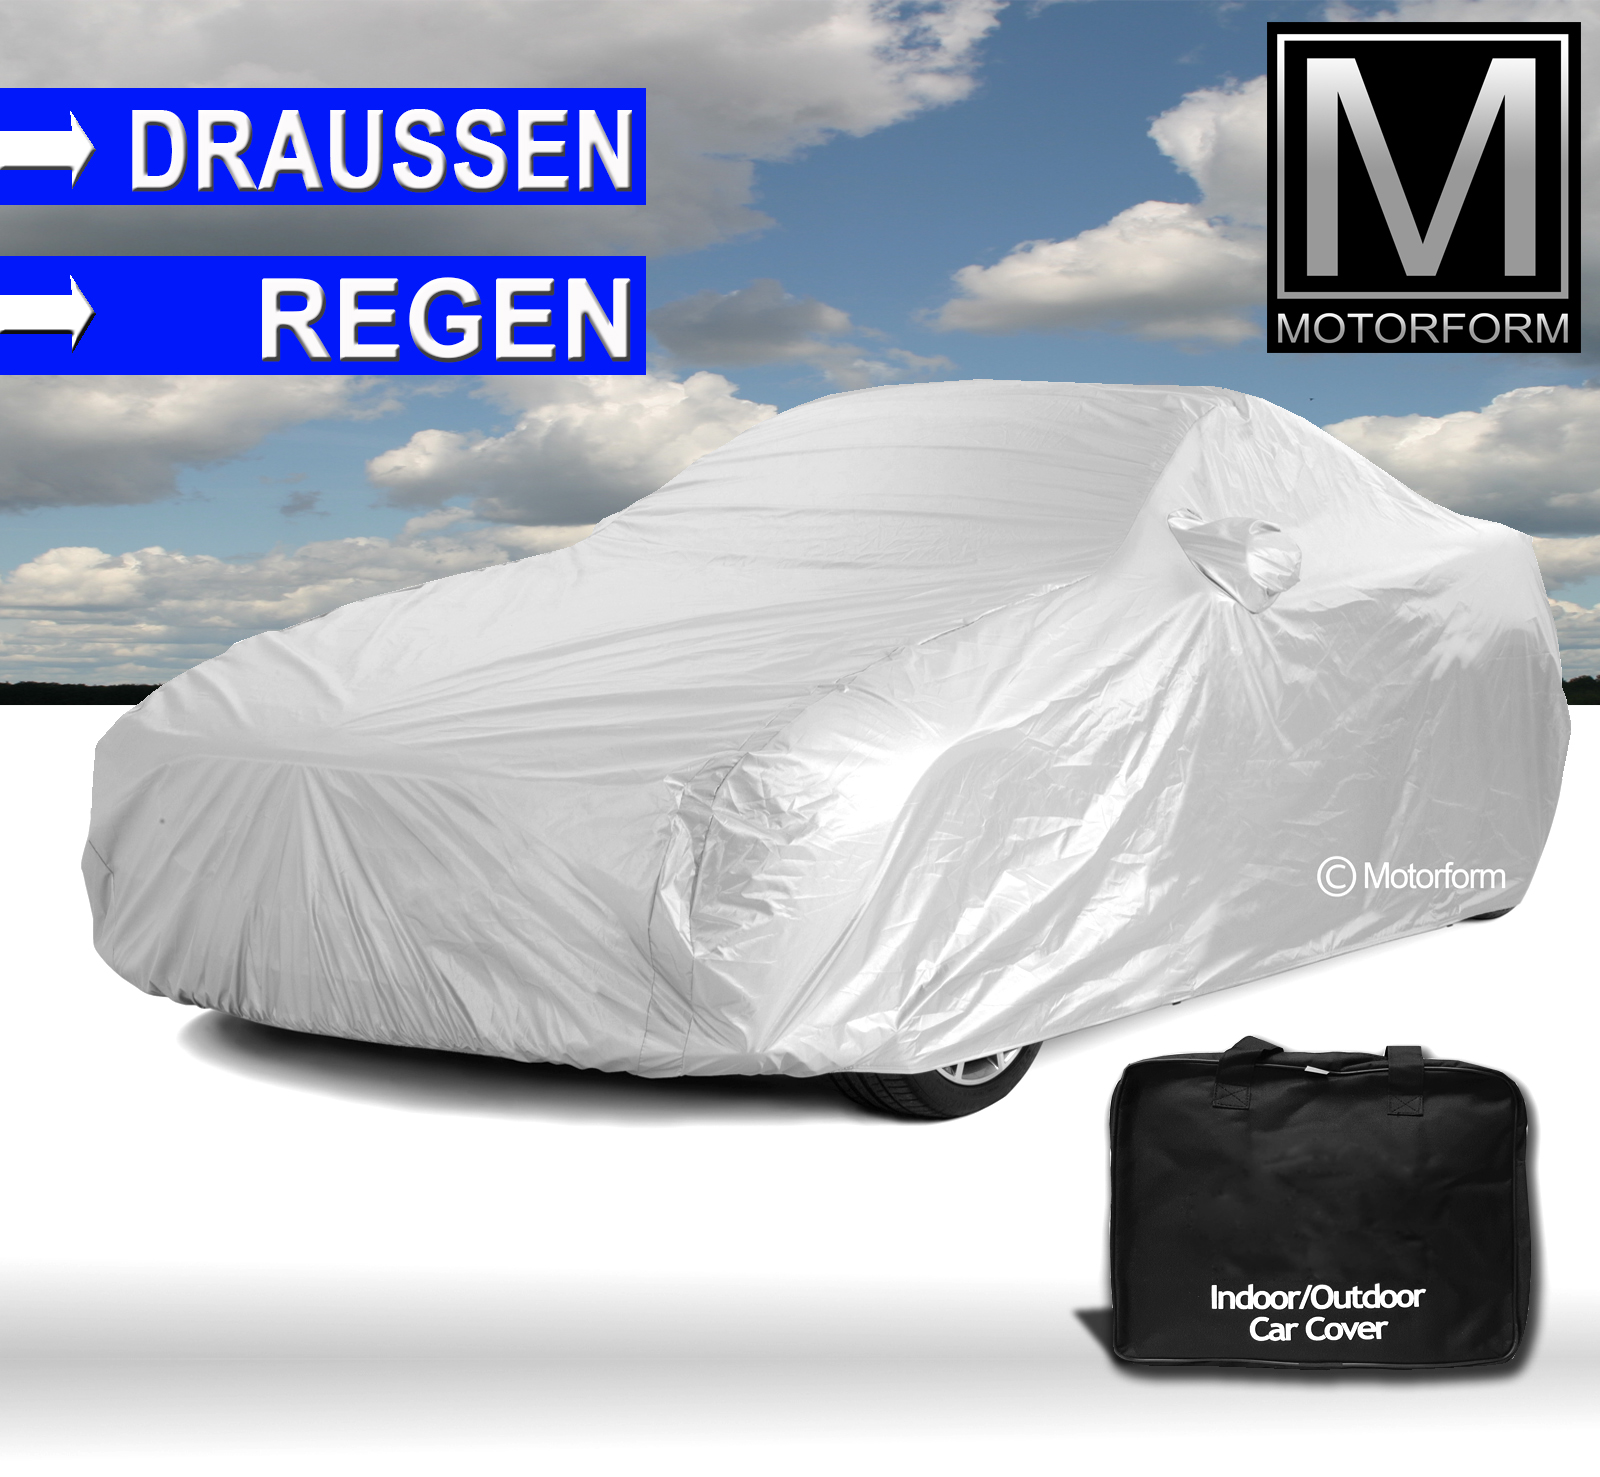 Voyager Outdoor Car Cover for Peugeot 607